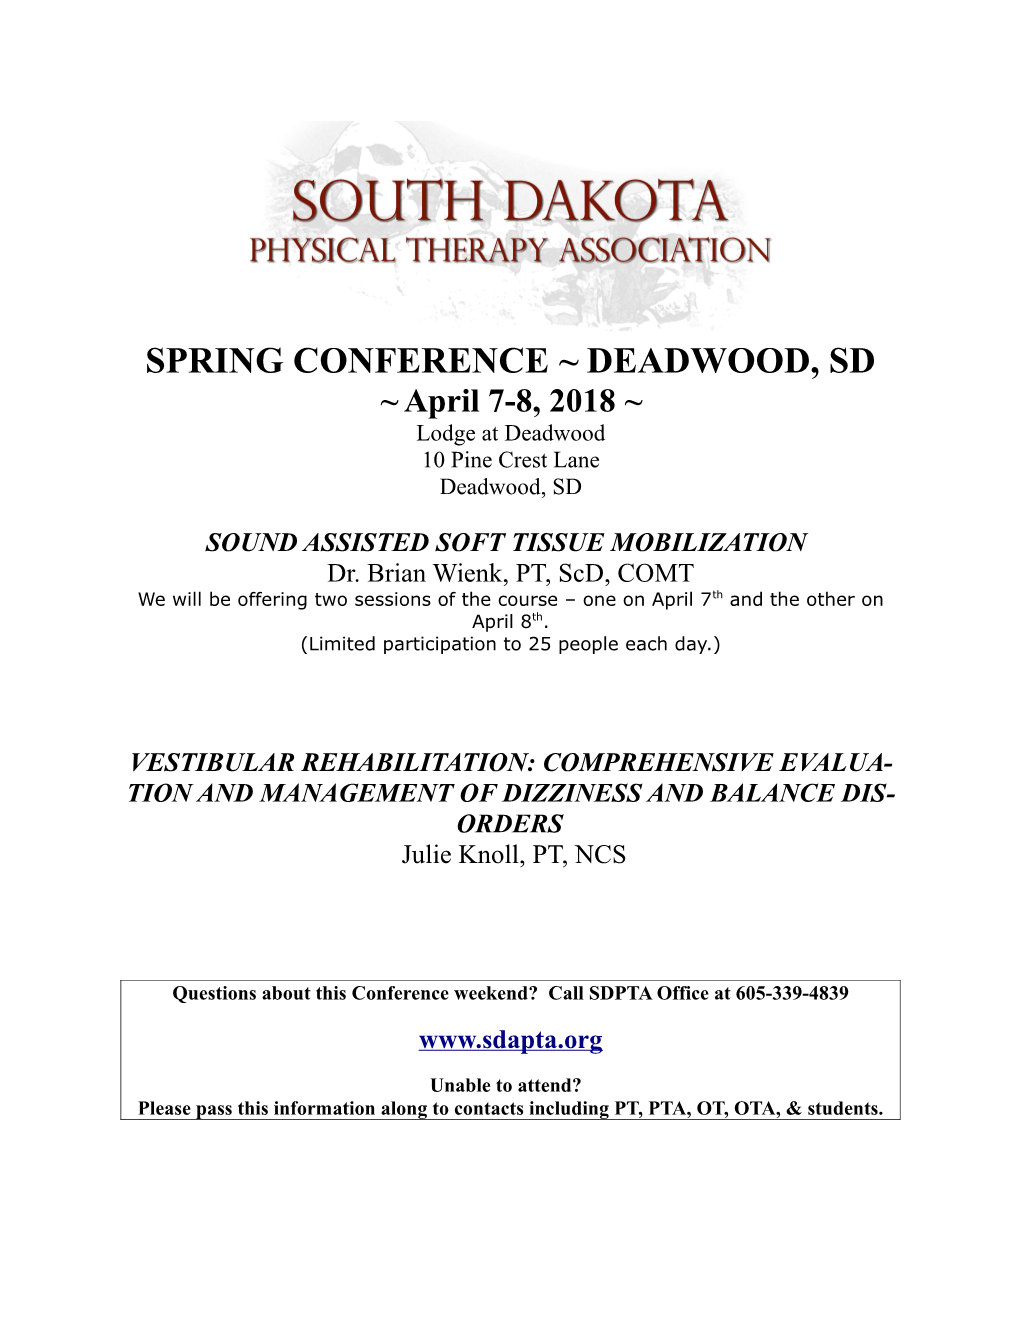 Spring Conference Deadwood, Sd